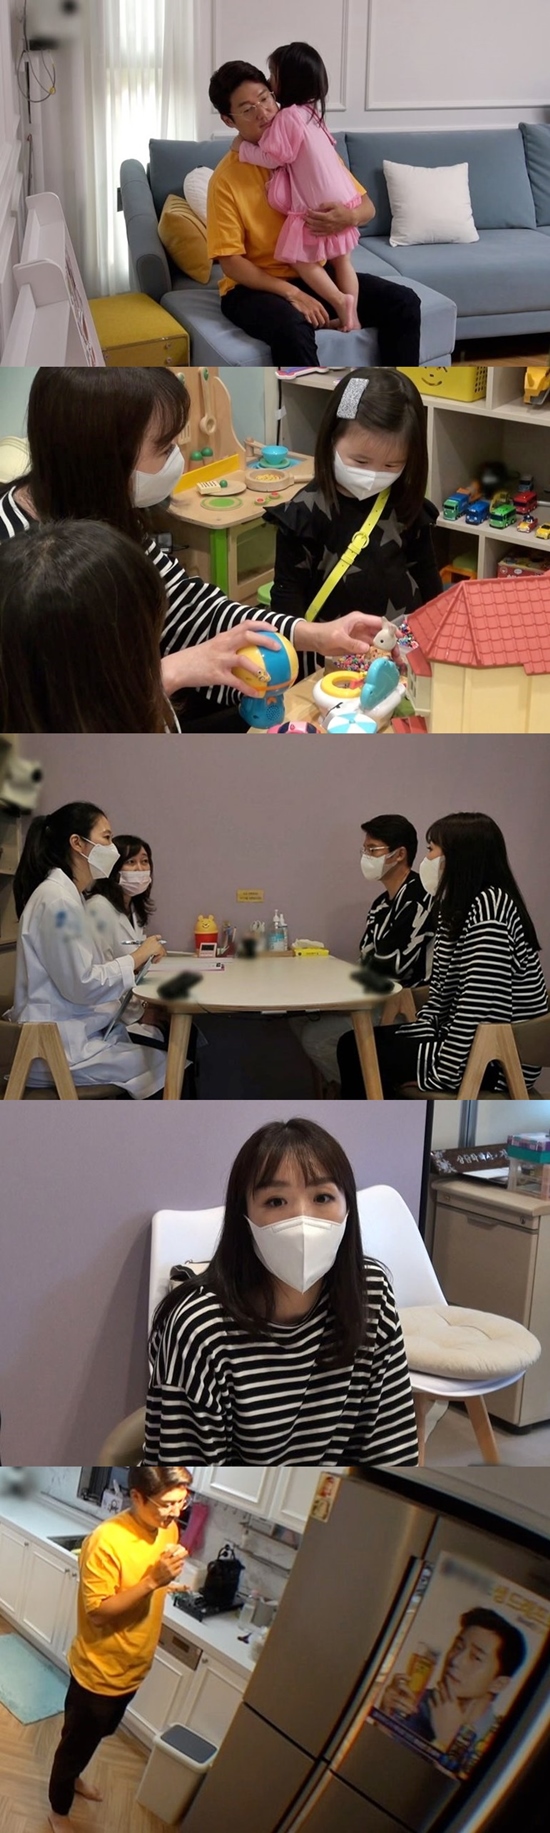 Song Chang-eui Mrs Oh Ji-young and daughter Ha Yul revealed their fanfare for Park Seo-joon.On SBS Same Bed, Different Dreams 2 Season 2 - You are My Destiny (hereinafter referred to as You Are My Destiny), Song Chang-eui Oh Ji-young and his wife are trying to solve the problem of urination of their daughter Ha Yul.Song Chang-eui Oh Ji-young and his wife have been troubled recently when their four-year-old daughter, Ha Yul, suddenly refused to urinate.Song Chang-euis wife Oh Ji-young surprised everyone by saying, Sometimes, Ha Yul-yul does not go to the bathroom all day.MCs were worried that they should meet the teacher once and that they had such a tendency.In the end, Song Chang-eui Oh Ji-young and his wife visited the Childrens Psychological Counseling Center to find out why their daughter Ha Yul refused to urine.While studying the inner heart of Ha Yul through the play evaluation, the two heard the shocking results and fell into a mens bun.Song Chang-eui expressed his sorry for his daughter, Ha Yul, saying, I did not know that it would affect the child. Oh Ji-young also said, I think it is because of me.Meanwhile, Song Chang-eui Oh Ji-young and his wifes house were visited by Park Seo-joon, a superlighting guest.Oh Ji-young showed the aspect of Park Seo-joon steaming fan, which was still ready, including putting the park Seo-joon poster prepared in advance on the refrigerator before the guest arrived.In addition, her daughter Ha-yul also said, Park Seo-joon is better than Father. It is the back door that Song Chang-euis jealousy was Explosion.I wonder if Song Chang-eui can use the hearts of Park Seo-joon steam fan wife and daughter.The story of Song Chang-eui Oh Ji-young, who was in the mood for the early Moonlighting guests, can be seen in You Are My Destiny, which airs at 11:10 pm on the 19th.Photo = SBS